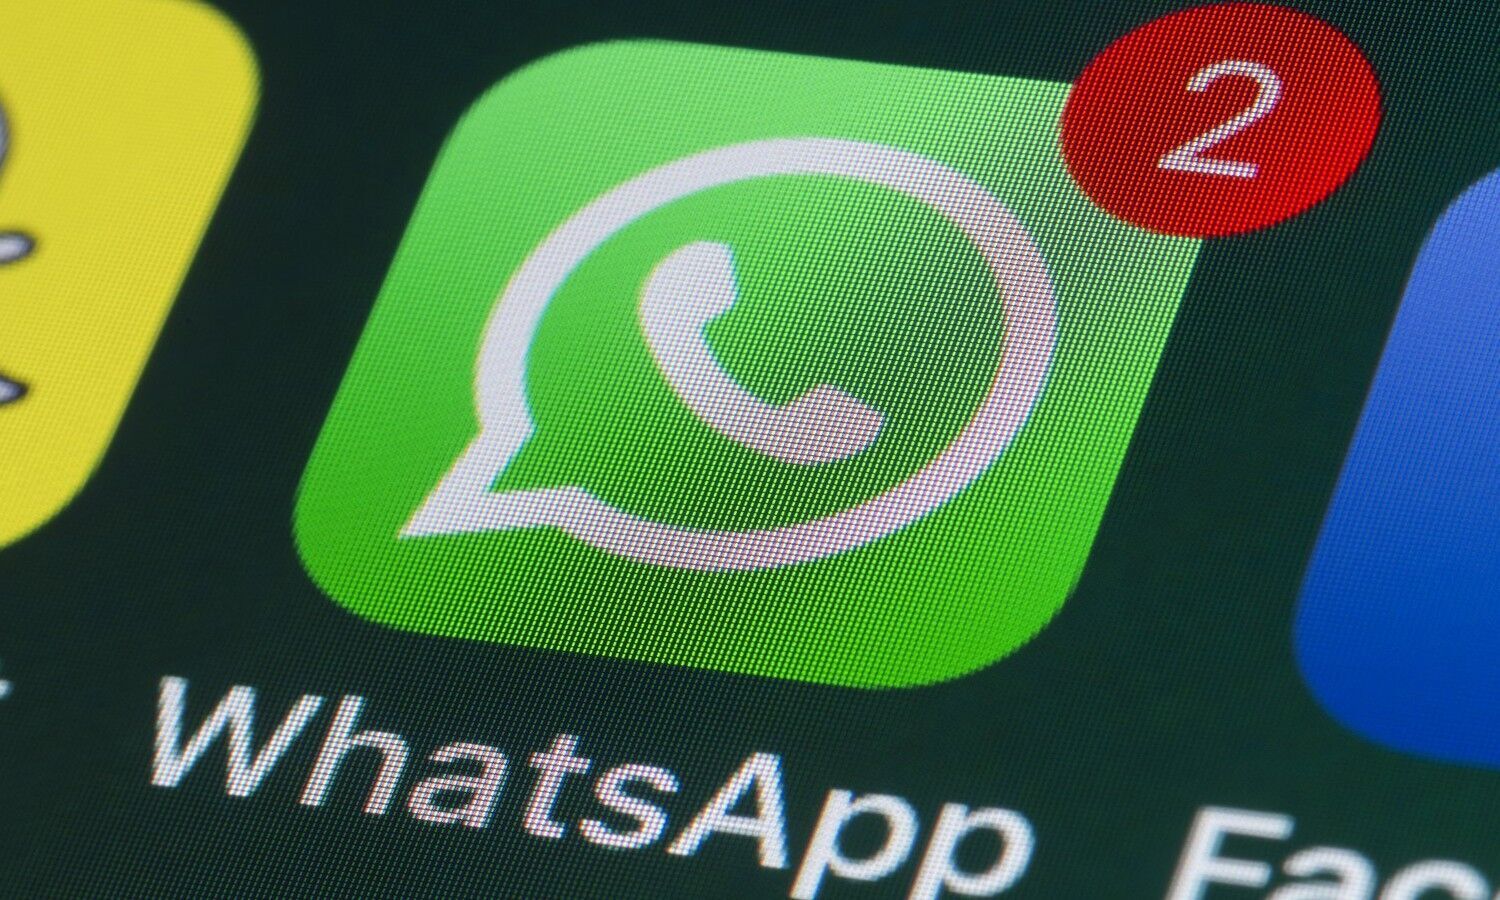 WhatsApp Call Charges: Now WhatsApp calls will have to be charged, this new rule will be applicable soon